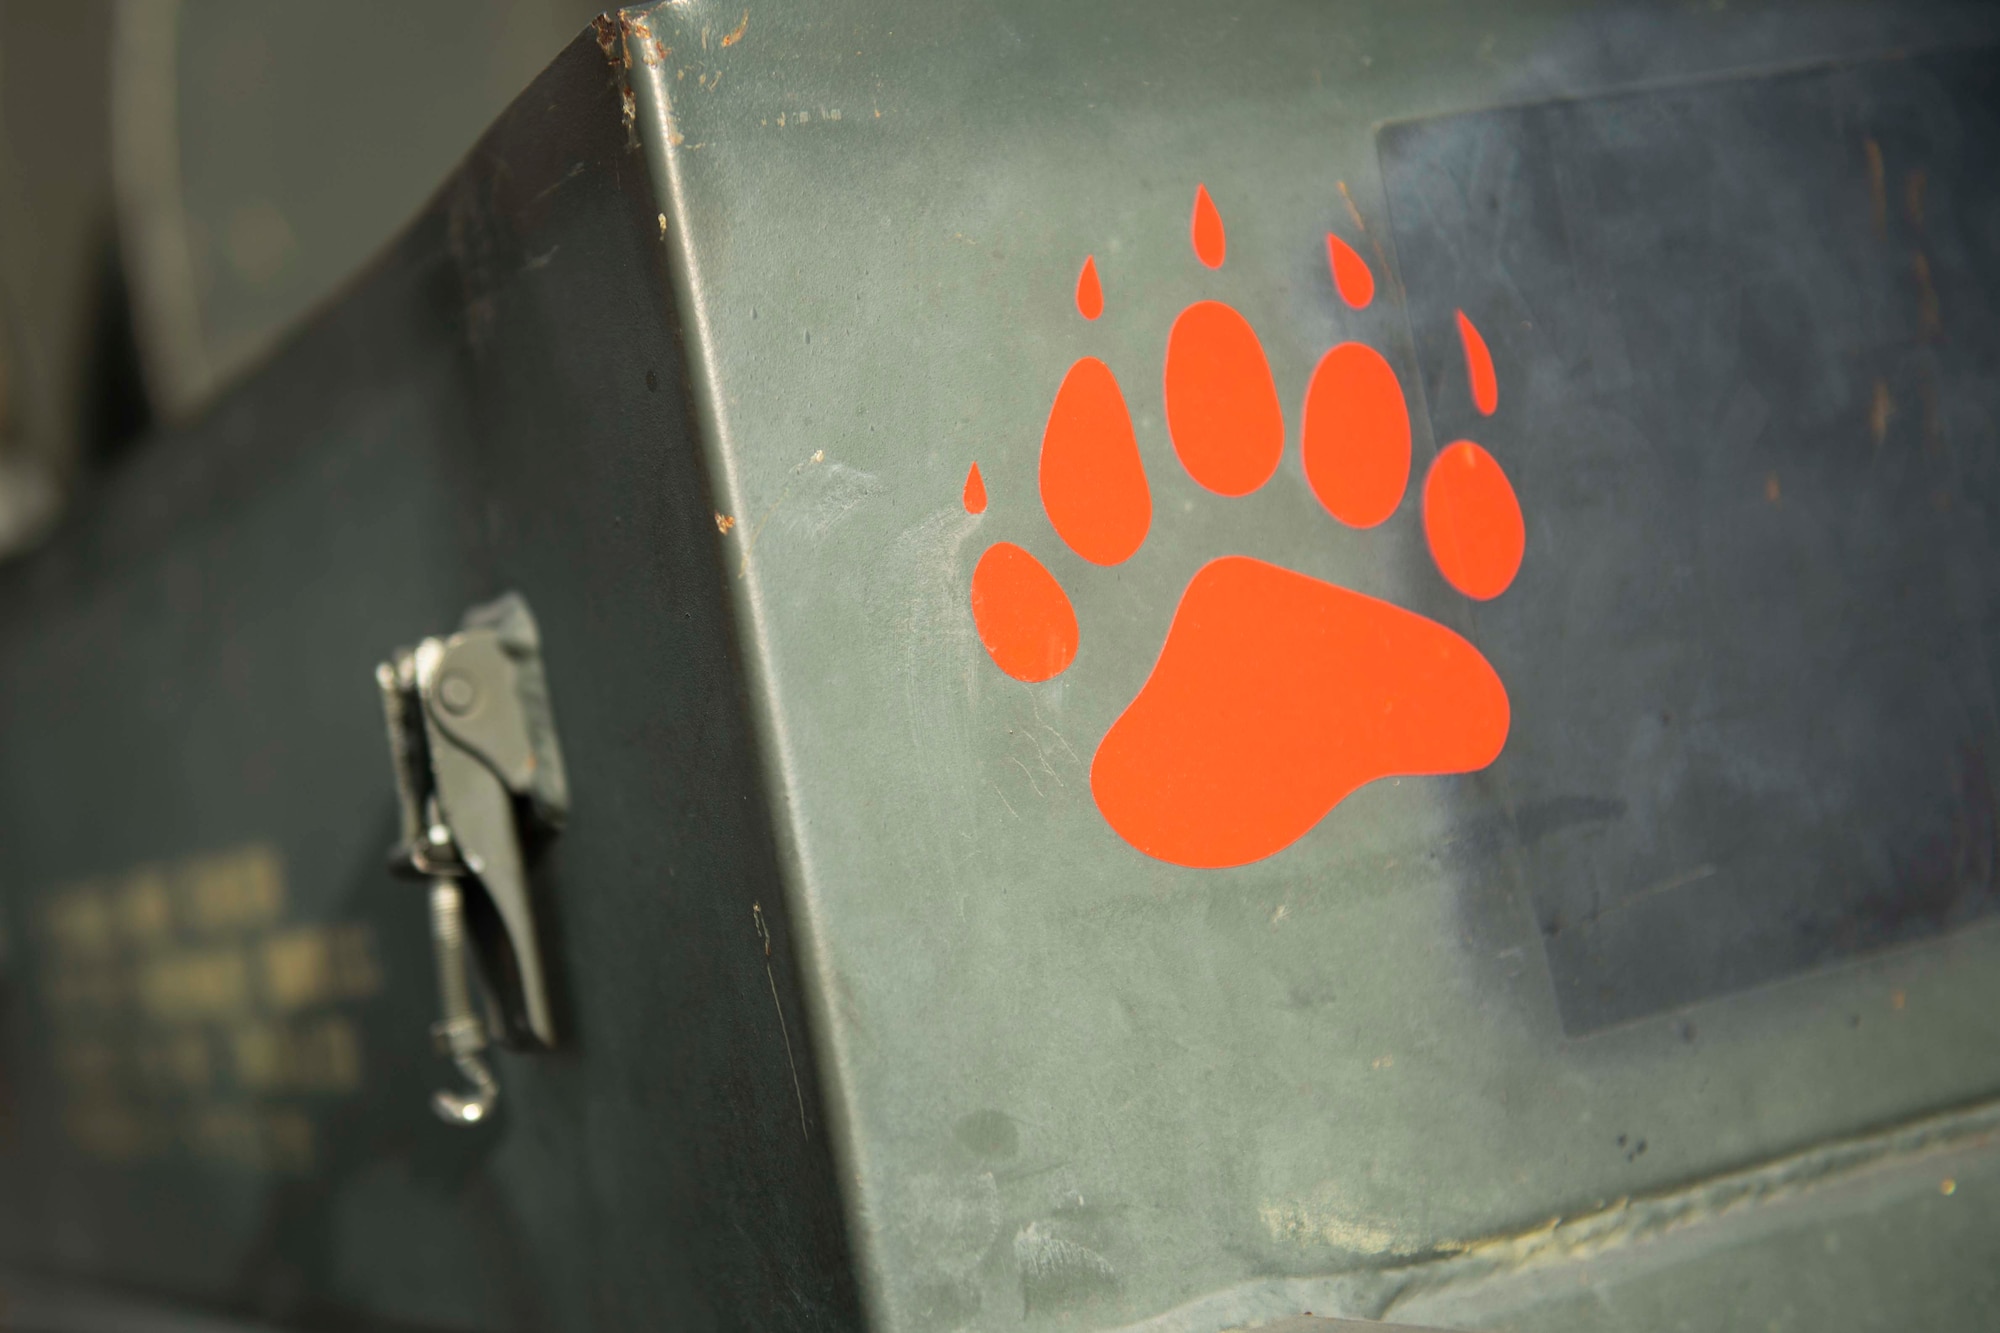 An icon depicts a bear's paw print on a piece of metal equipment.